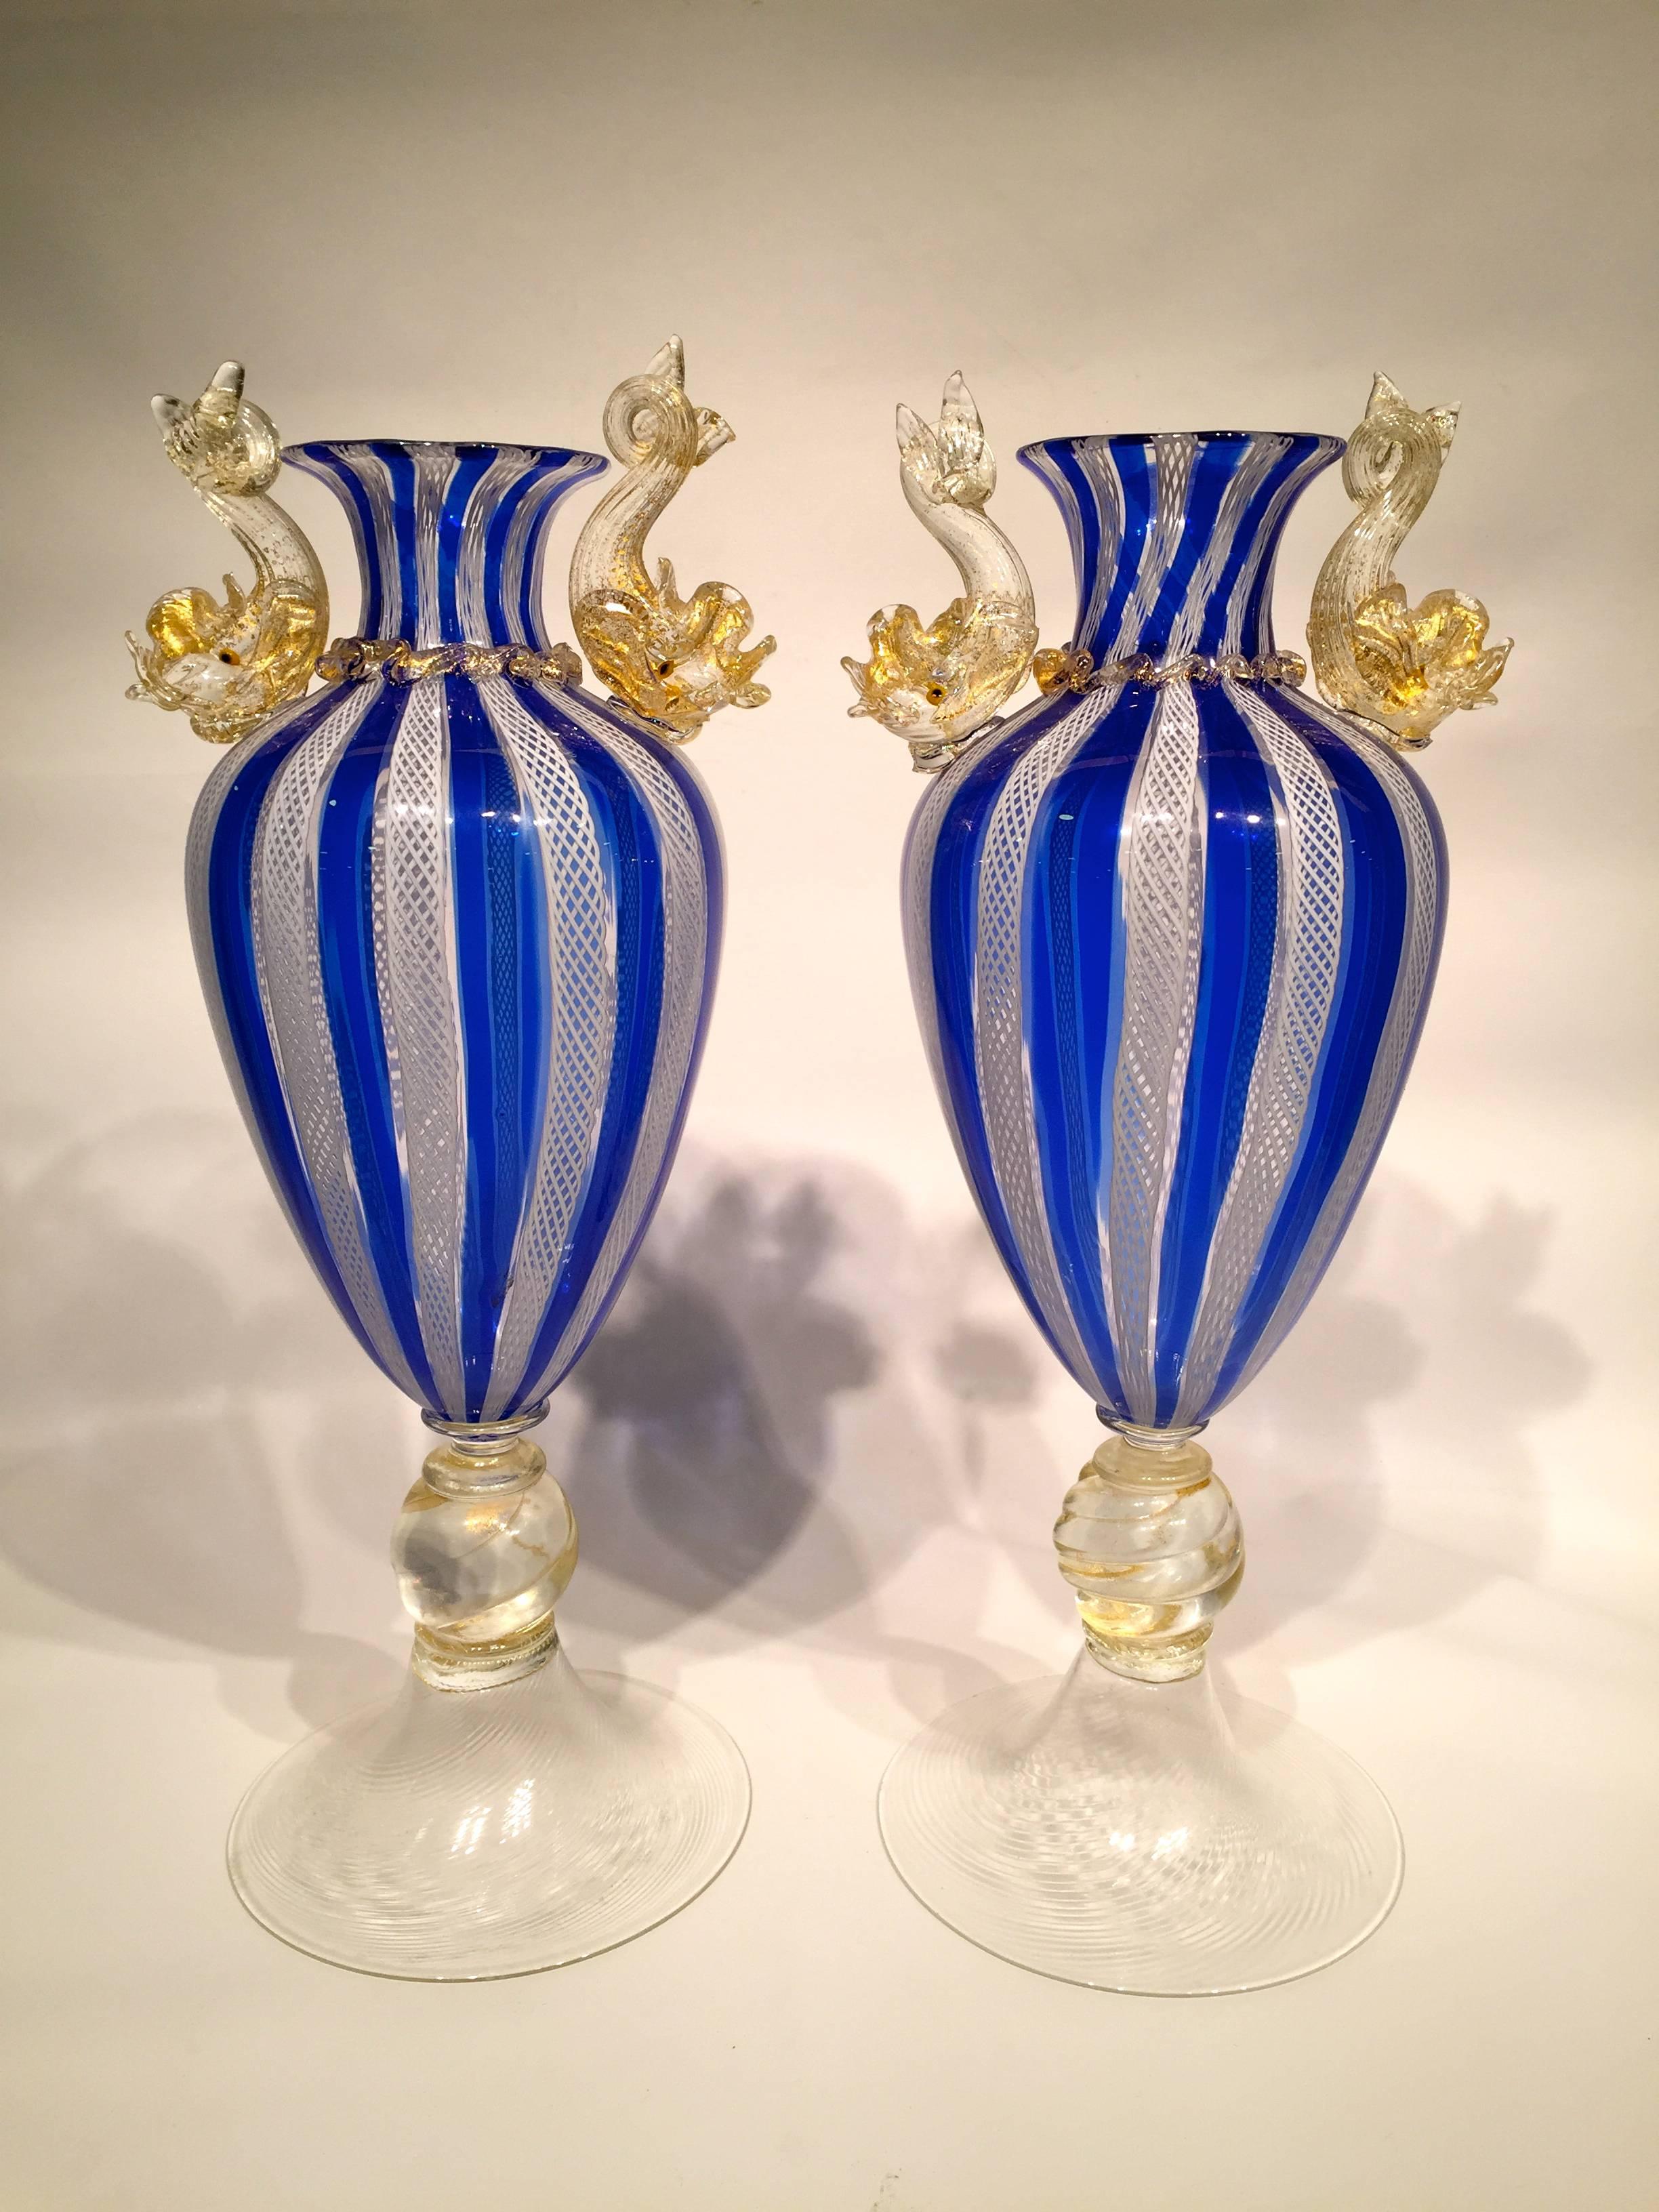 SALVIATI Pair of Murano Glass Dolphins Blue and White Vases, circa 1940 In Excellent Condition For Sale In Rio de Janeiro, RJ